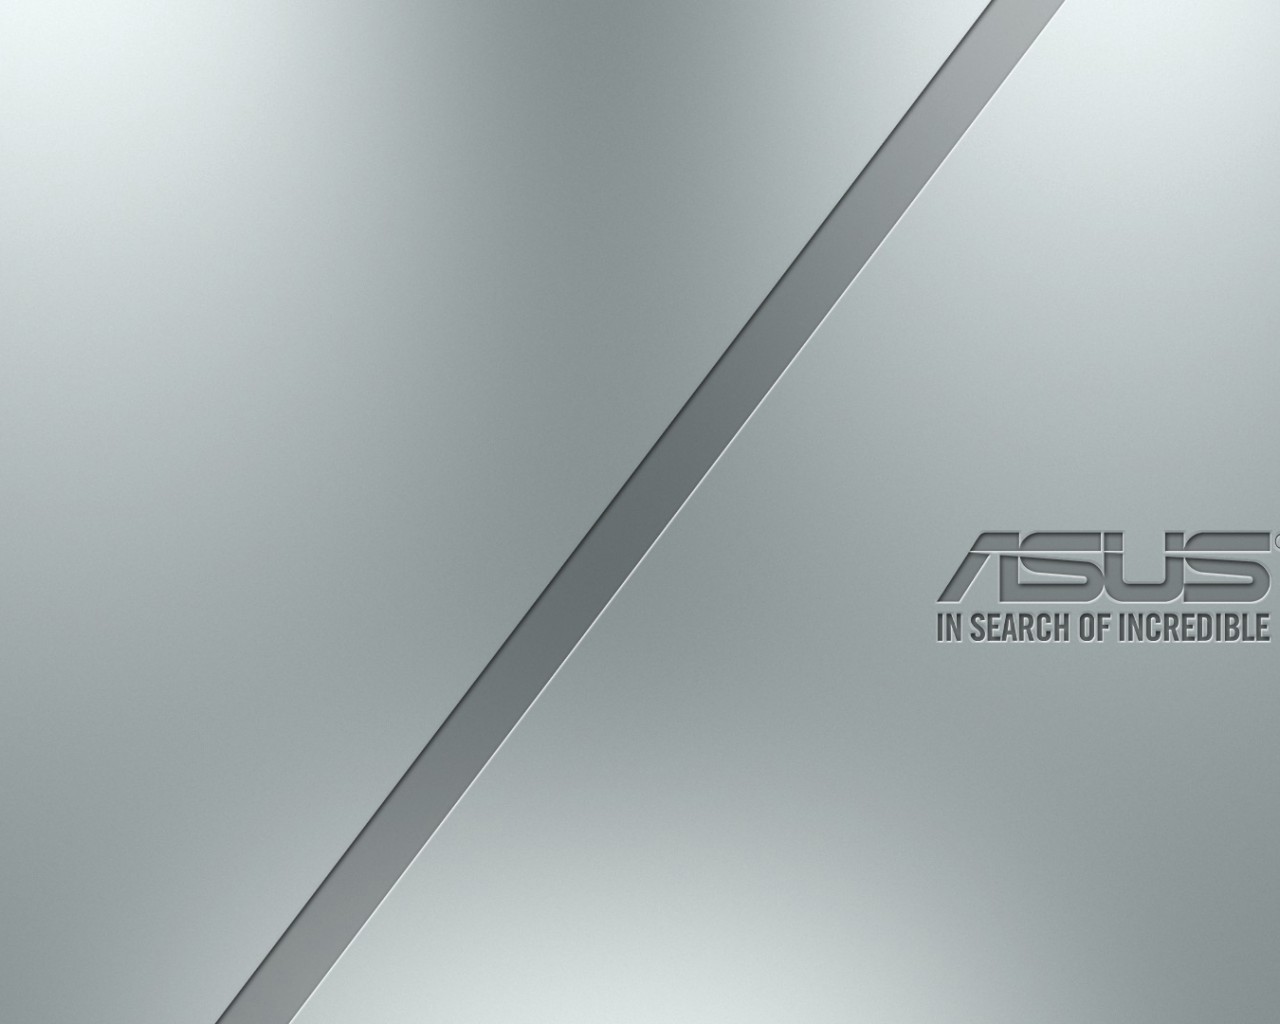 Asus In Search Of Incredible Wallpaper - Background Laptop Asus In Search Of Incredible , HD Wallpaper & Backgrounds